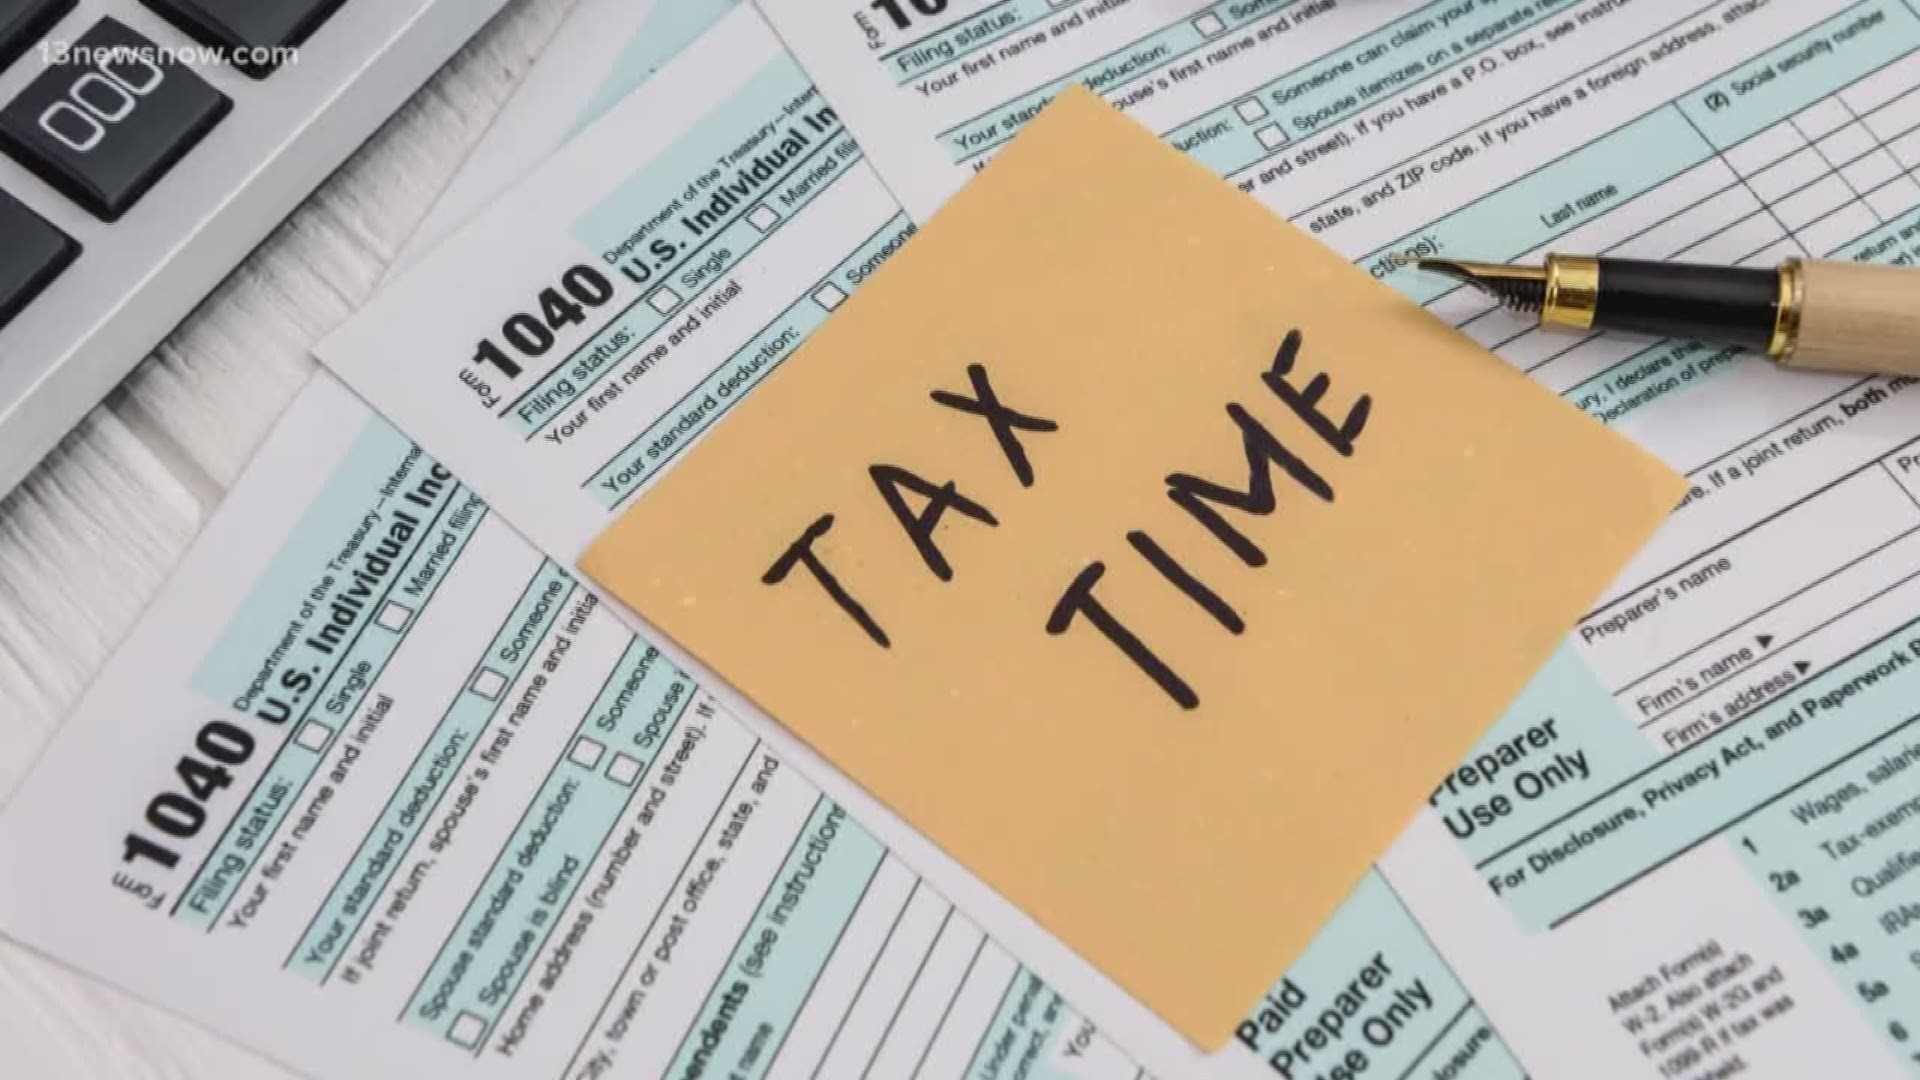 It's tax season and 13News Now Philip Townsend explains that if you file your taxes late, you could be missing out on a lot of money.